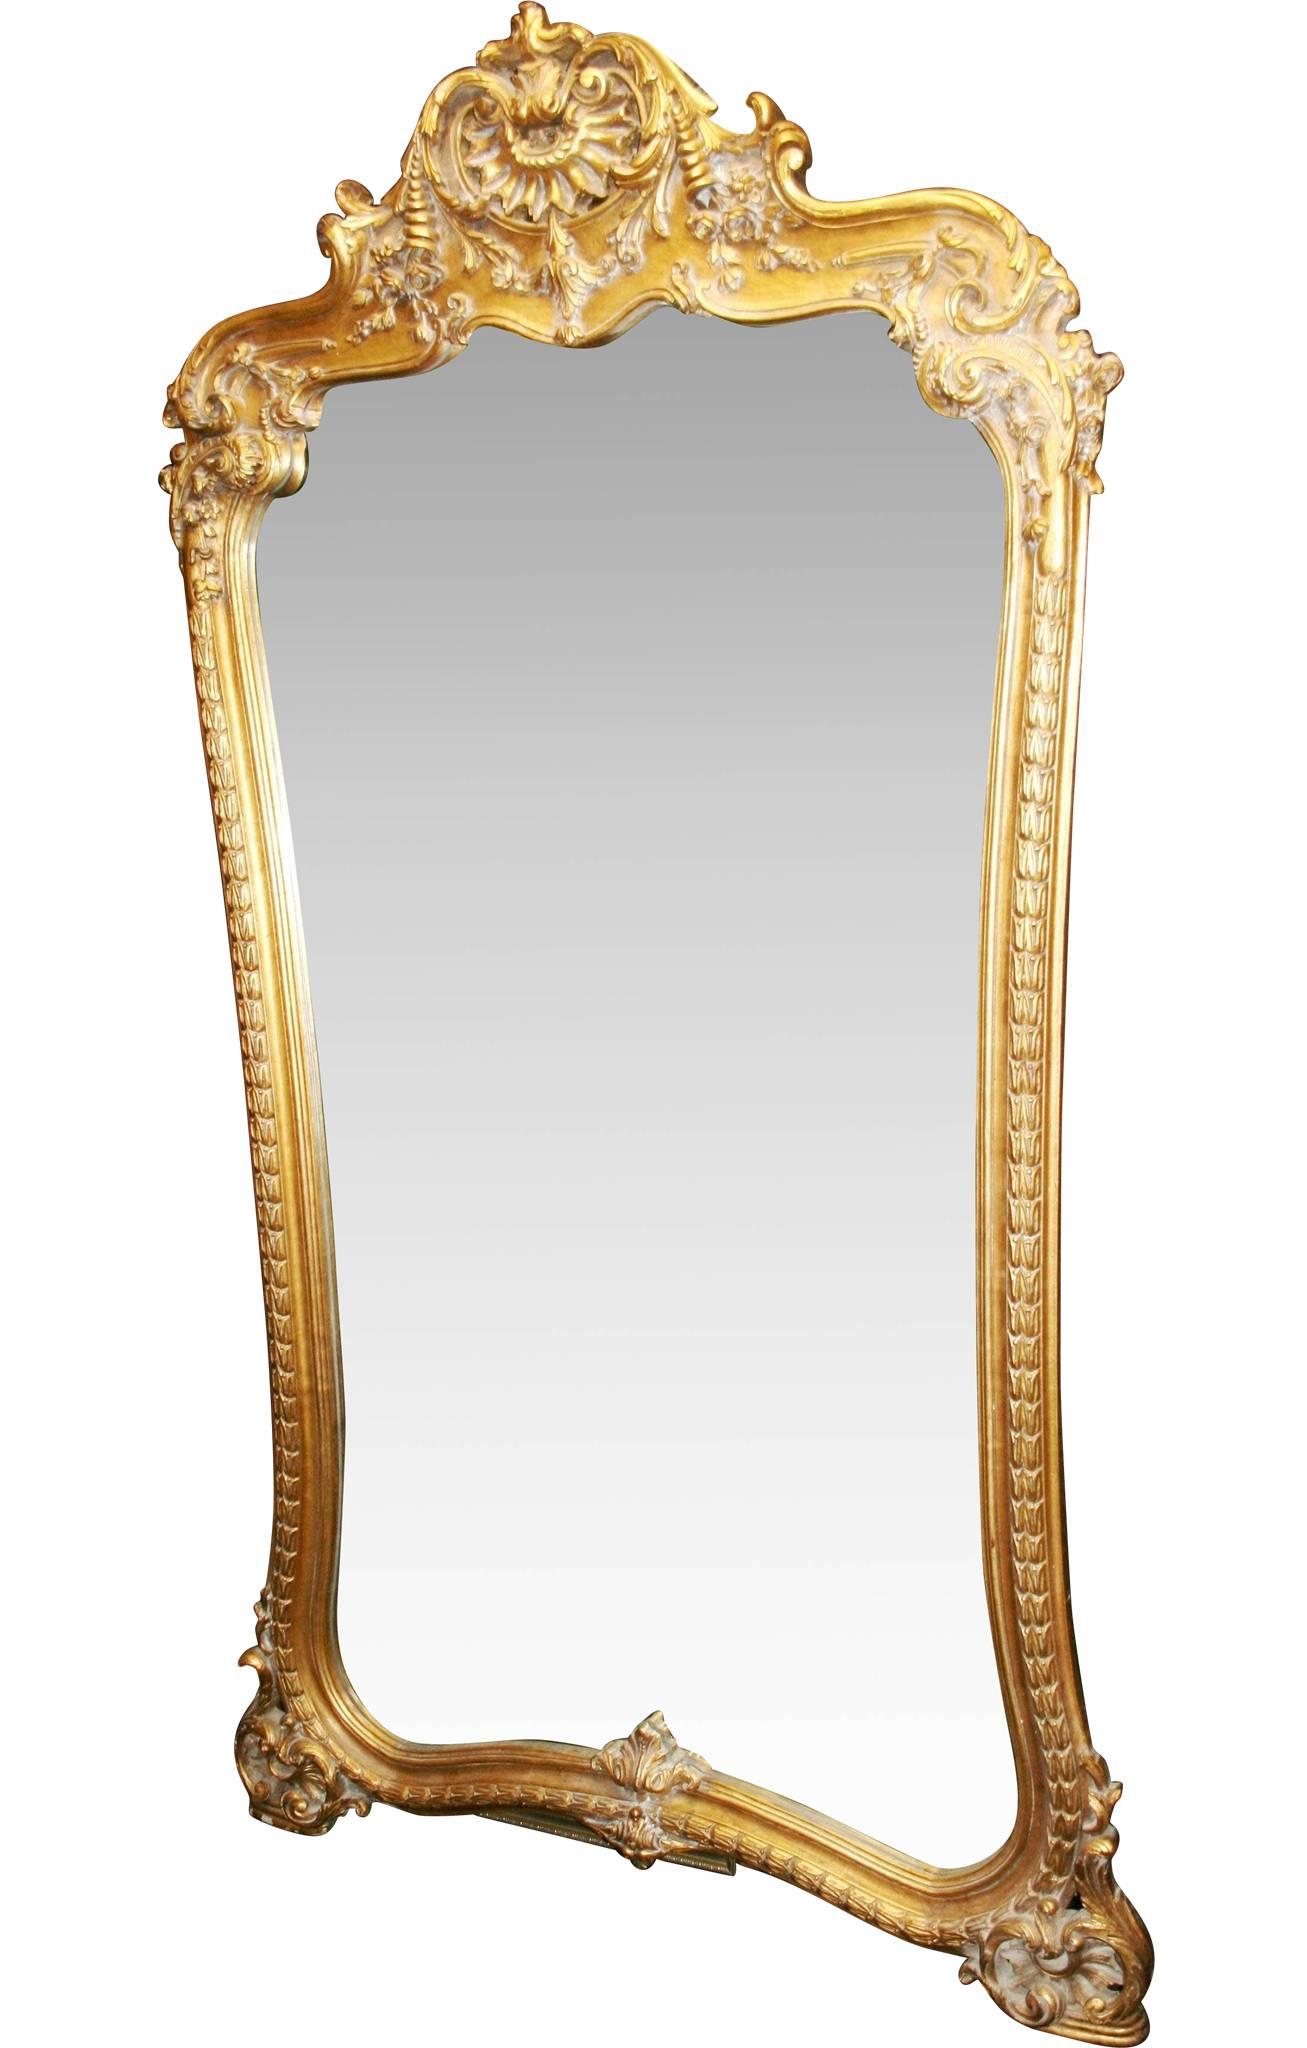 

Measures: Width 1.33 m 4 ft 4 1/2 in.
Height 2.27 m 7 ft 5 1/2 in.

Pair.
Style Louis XV.
Frame heavily carved wood.
Finish gilt, gold leaf.

Stunning pair of French style 7 1/2 ft tall mirrors.

Finely carved ornate frame set with